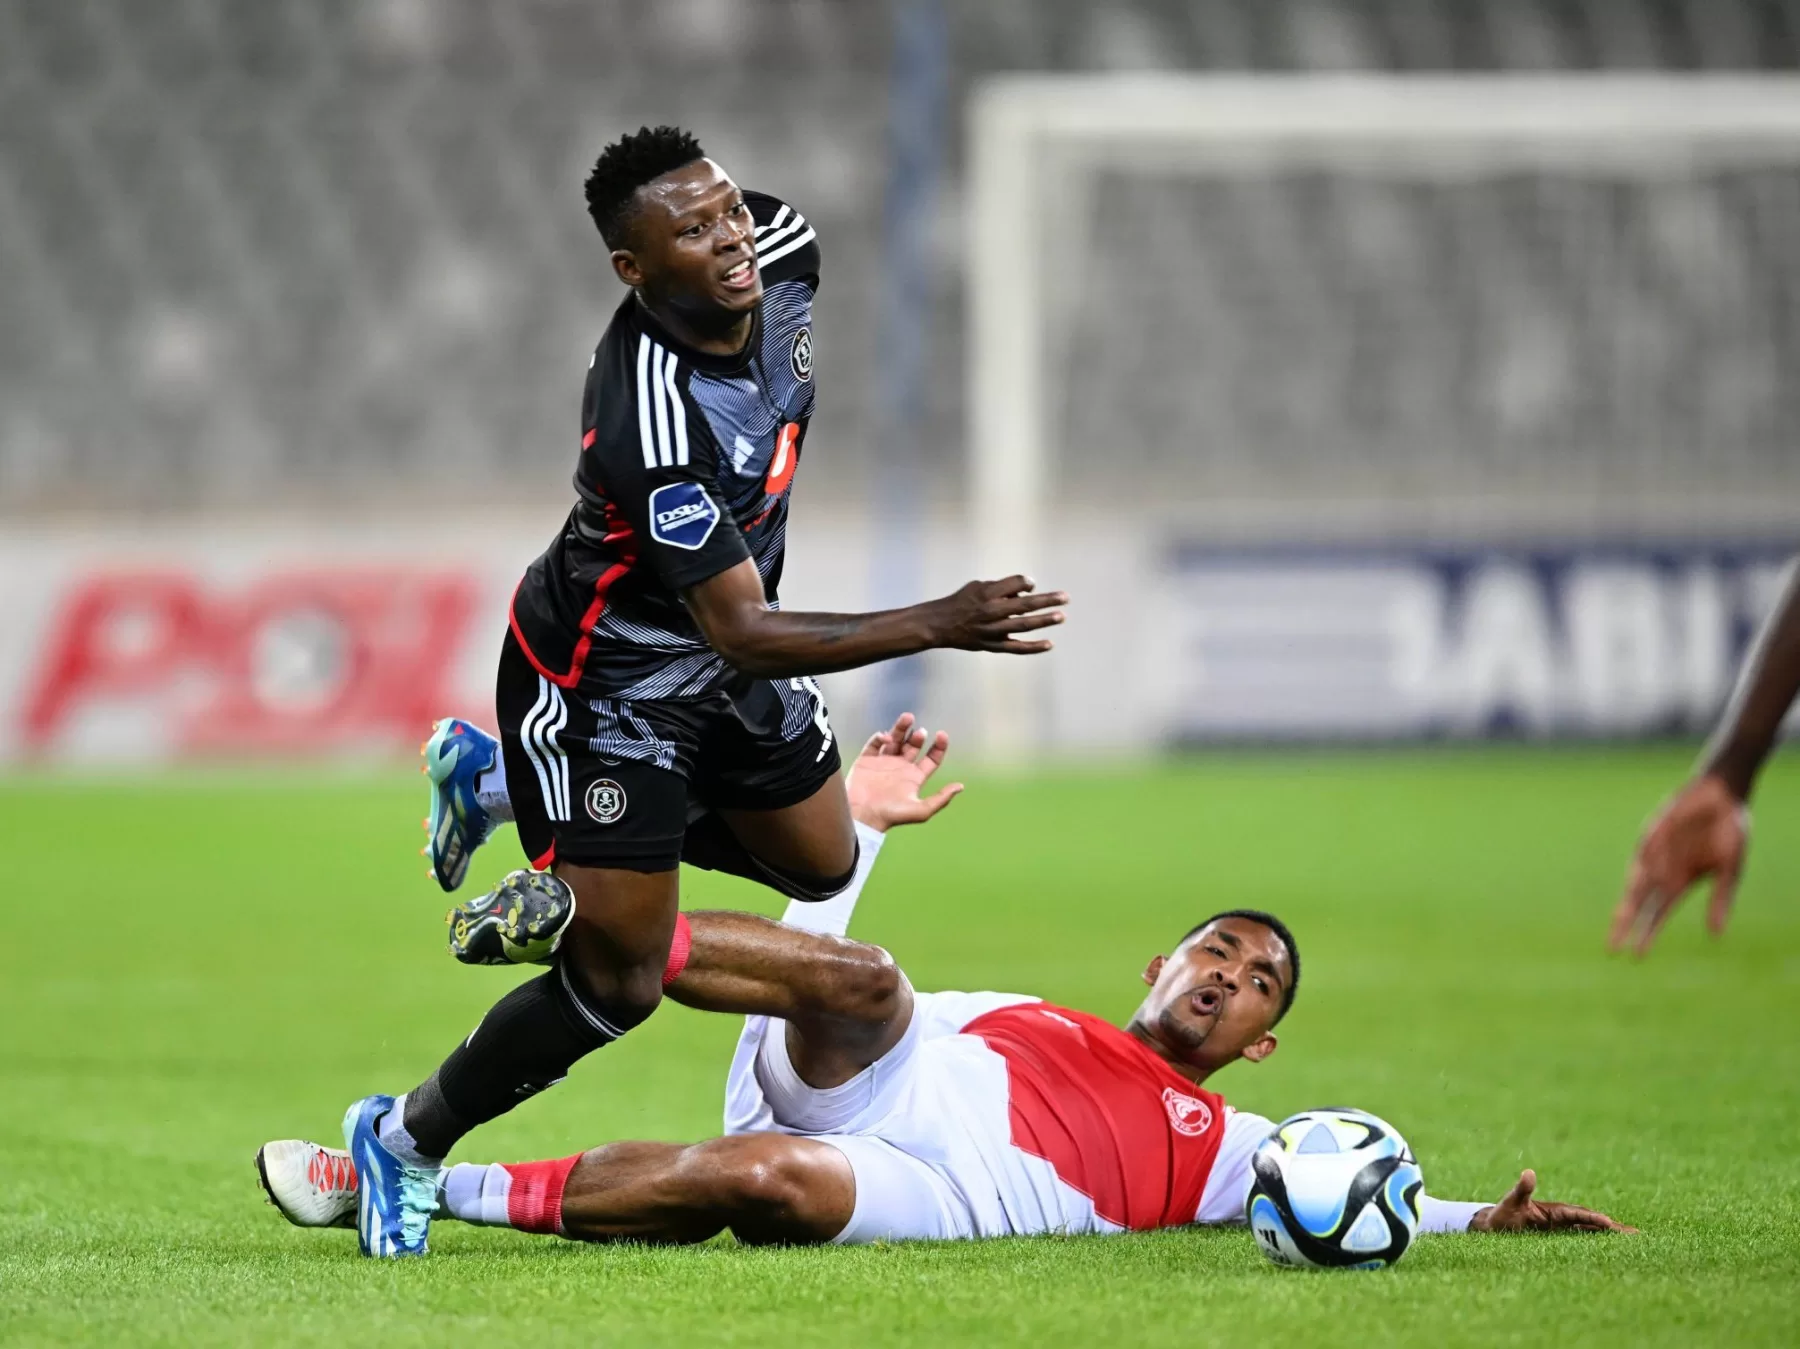 What Orlando Pirates coach Jose Riveiro thinks went wrong during the defeat to Cape Town Spurs